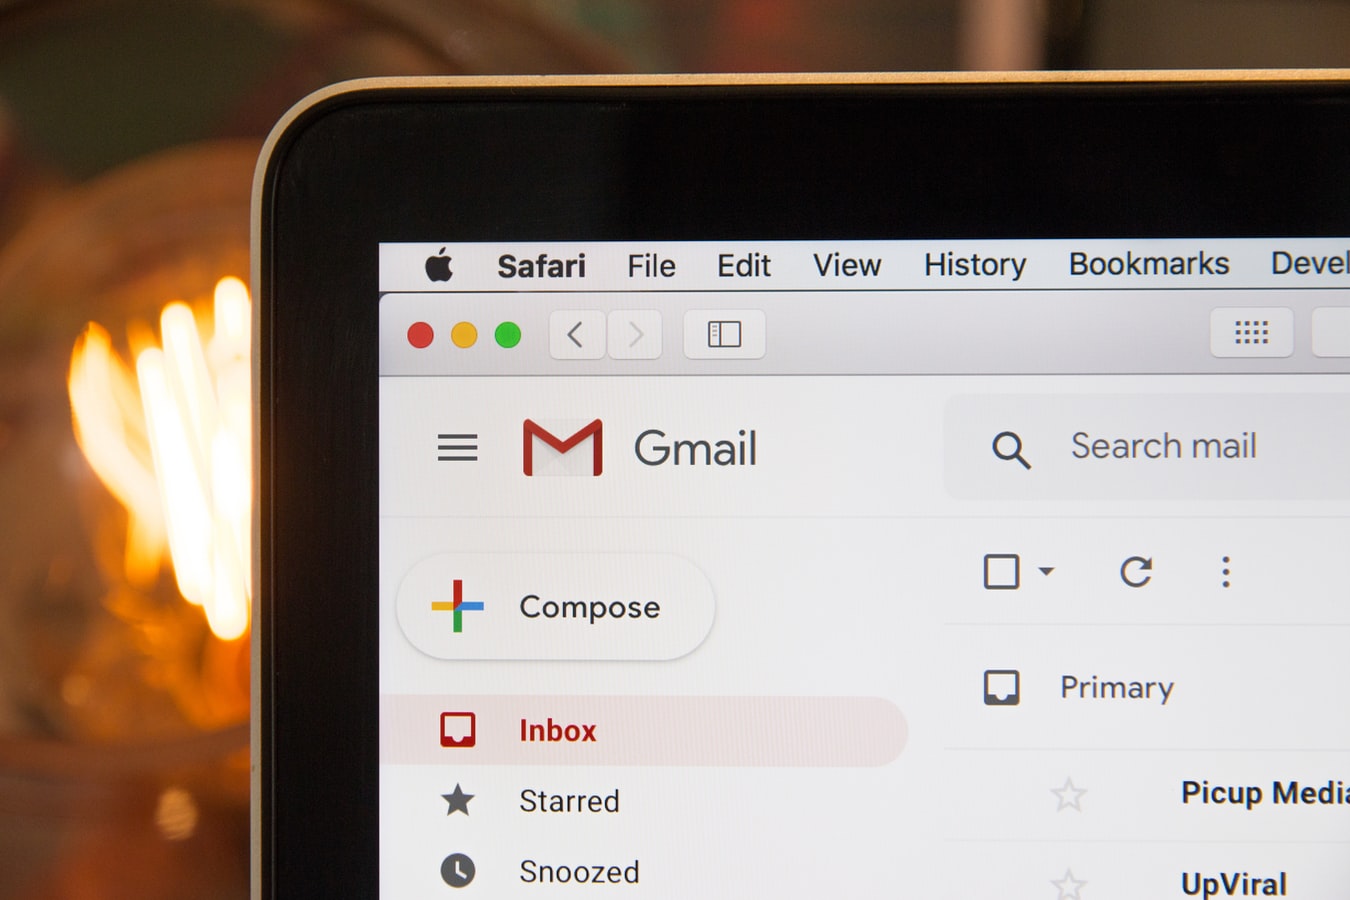 how to block emails from a sender